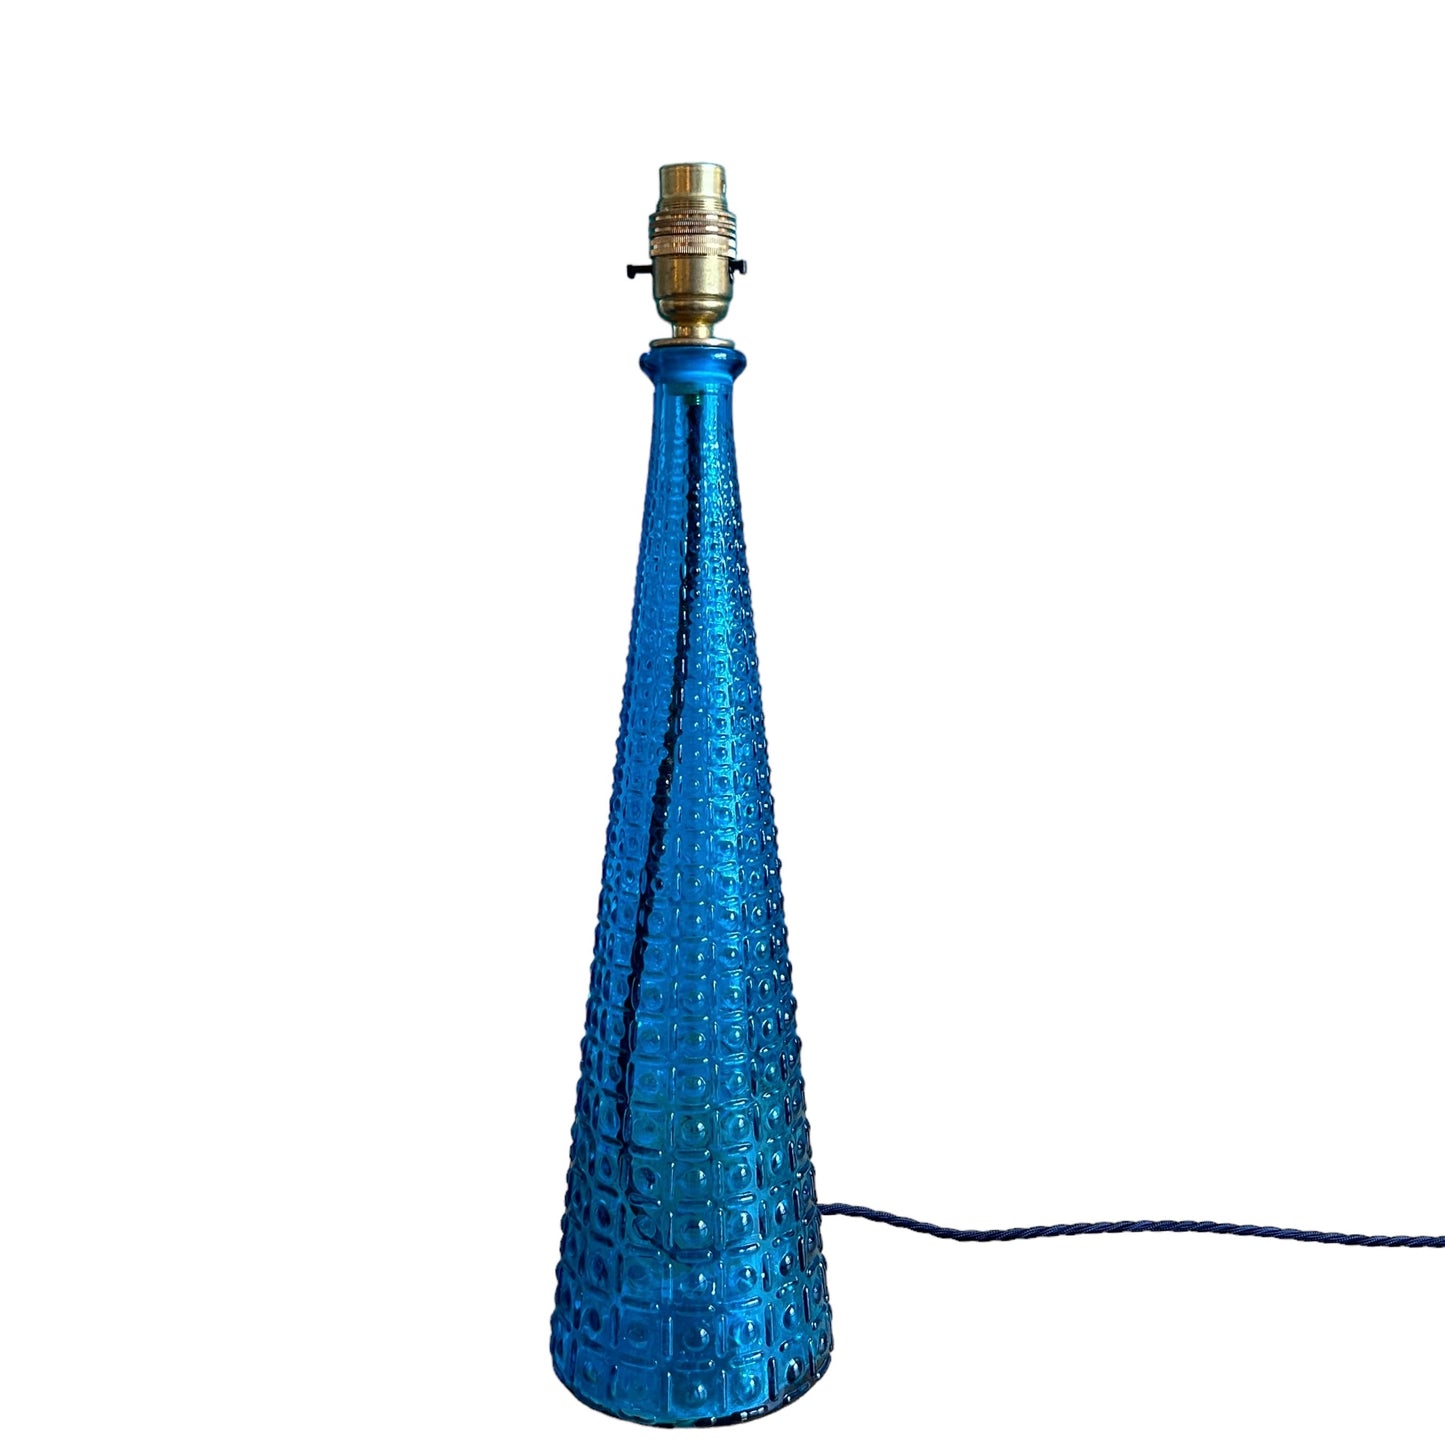 Glass cone lamp in turquoise